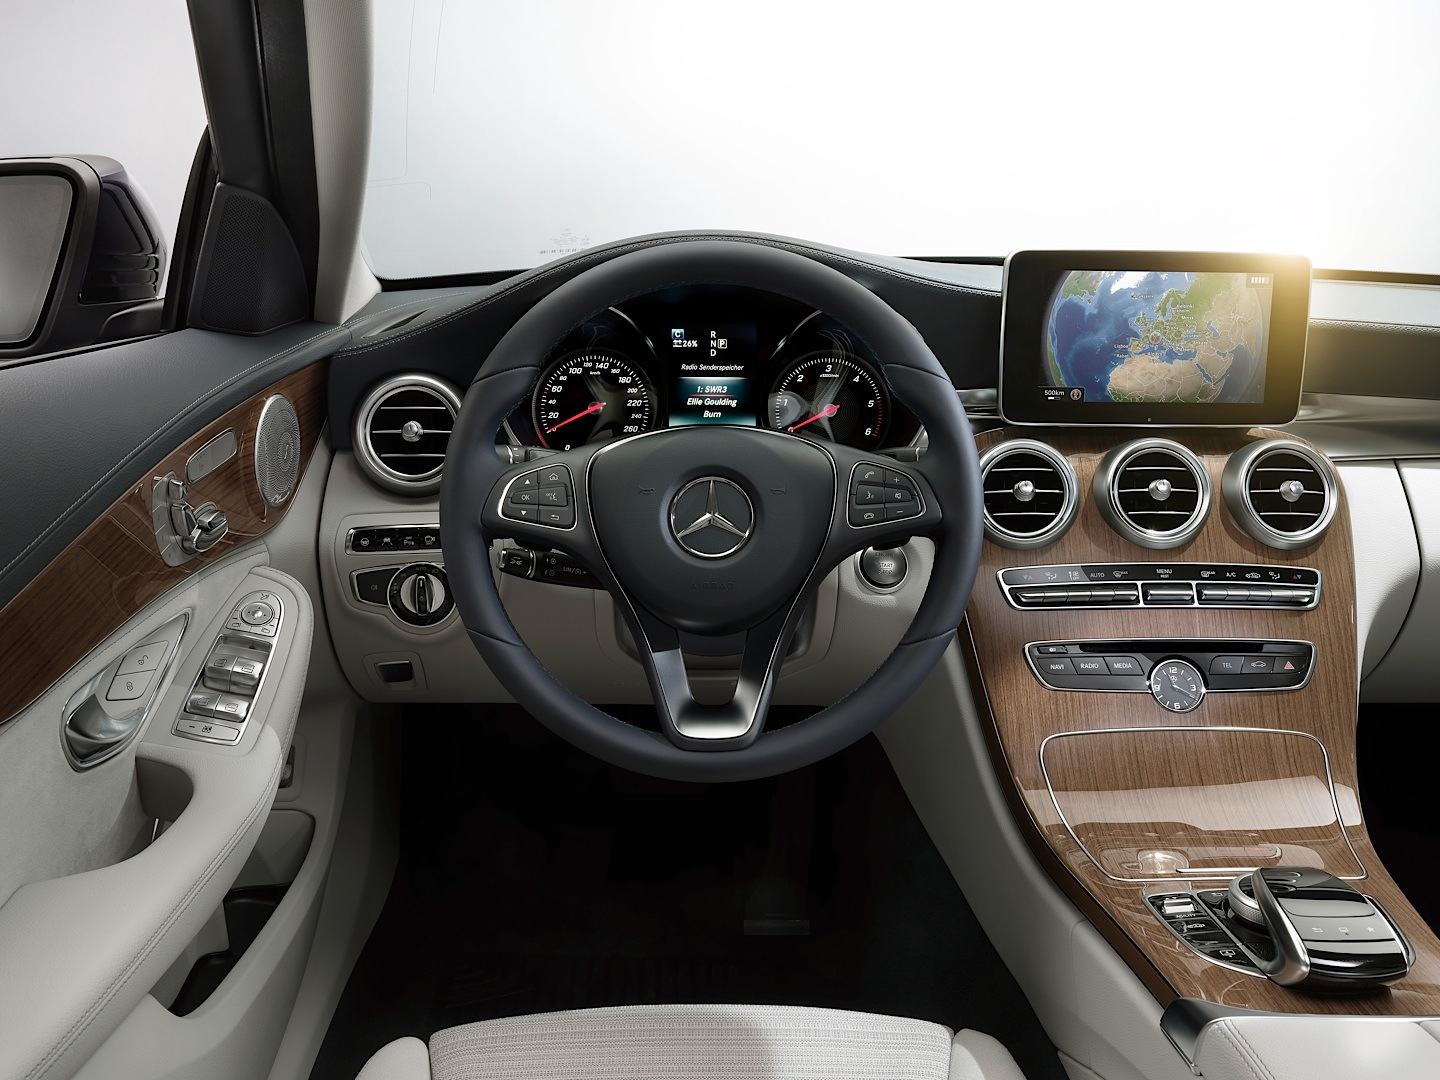 check-out-the-first-official-footage-with-the-new-c-class-w205-video-1080p-2